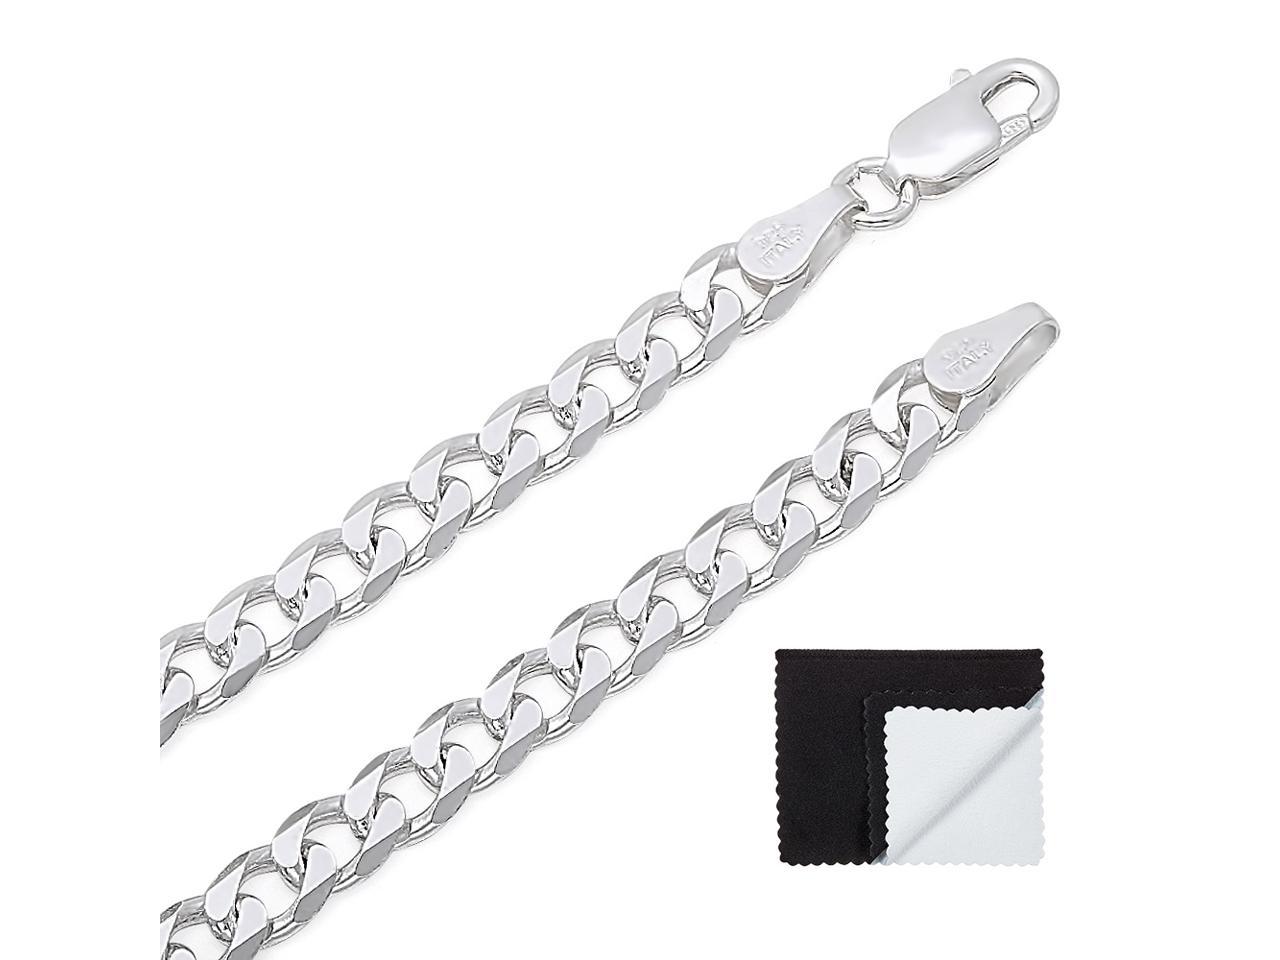 Details about   925 Sterling Silver Solid Curb Chain Necklace Choker 7-30 inch-Gift 4U* R4UL